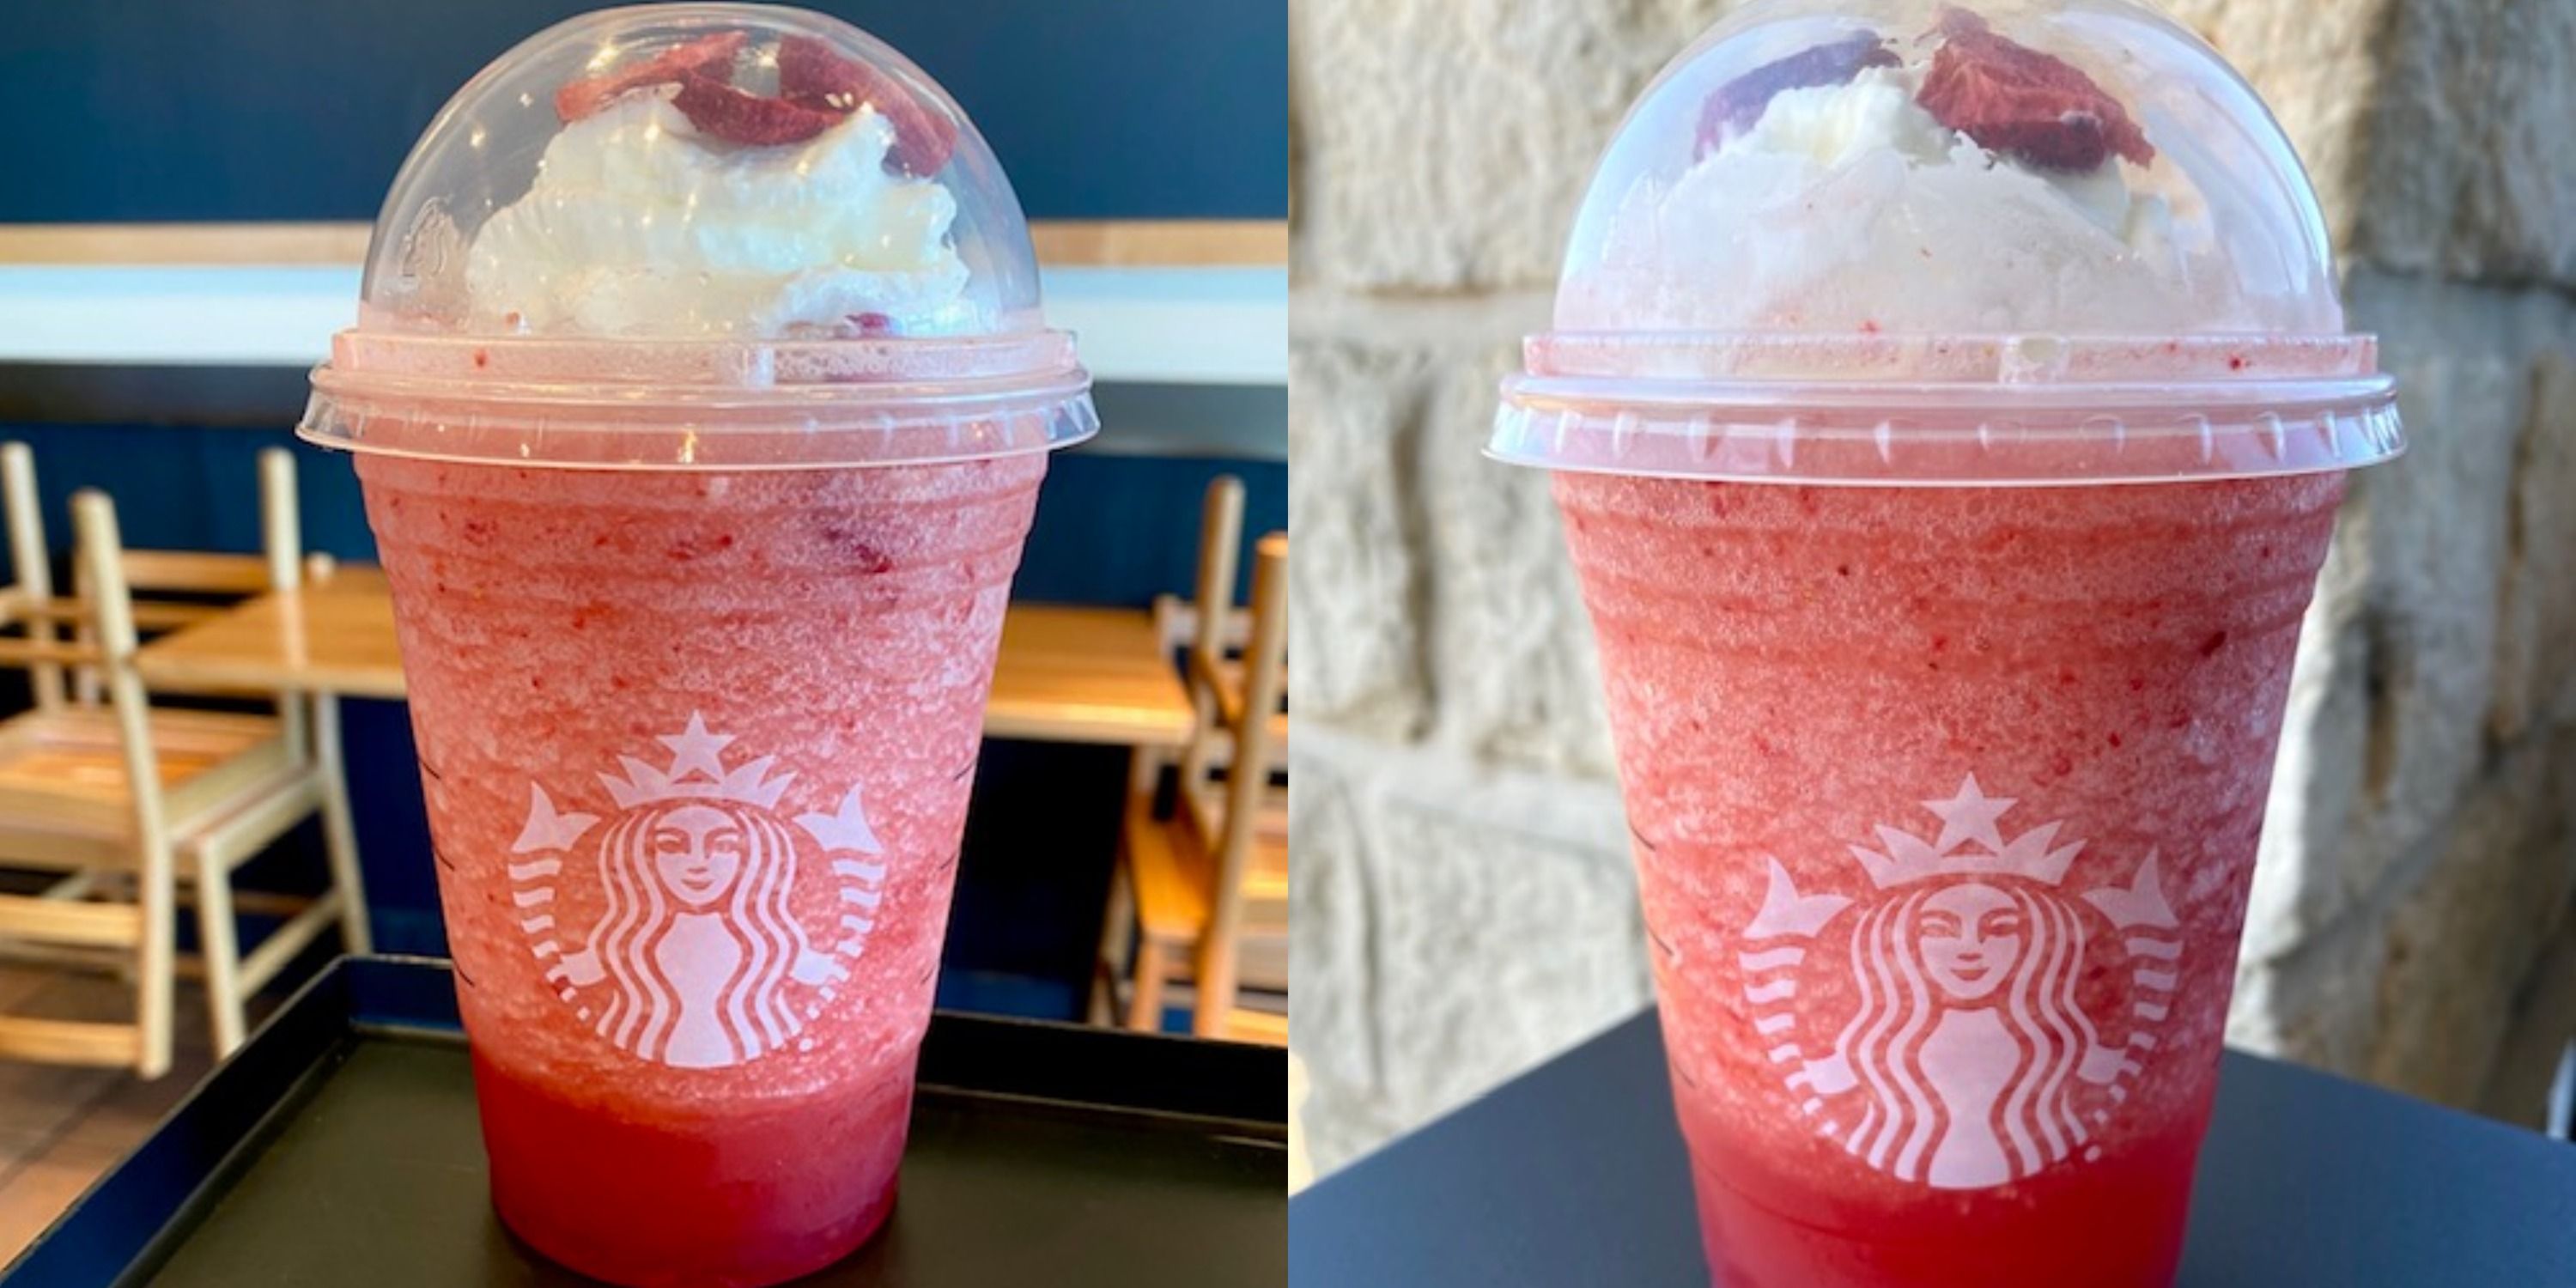 How To Order A Strawberry Daiquiri Frappuccino From Starbucks,How To Change A Light Socket